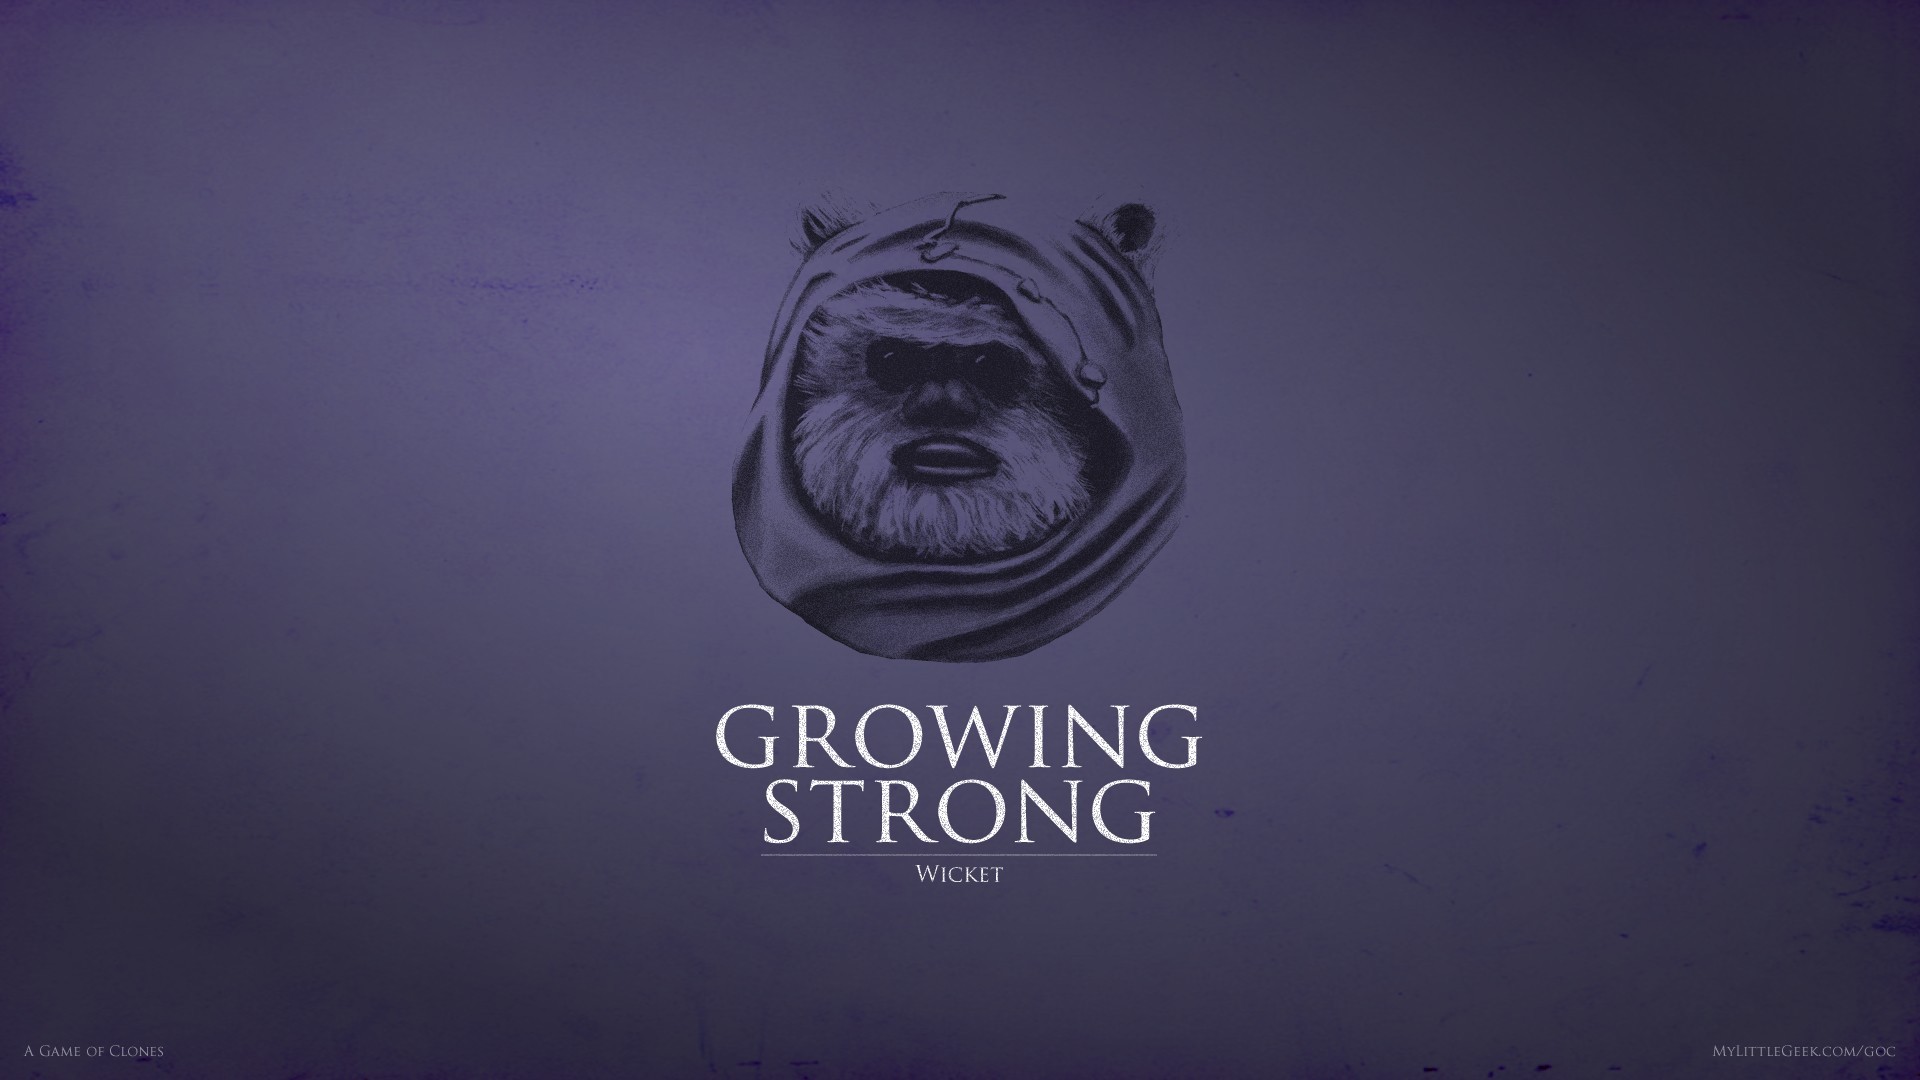 Growing Strong Wicket the Ewok